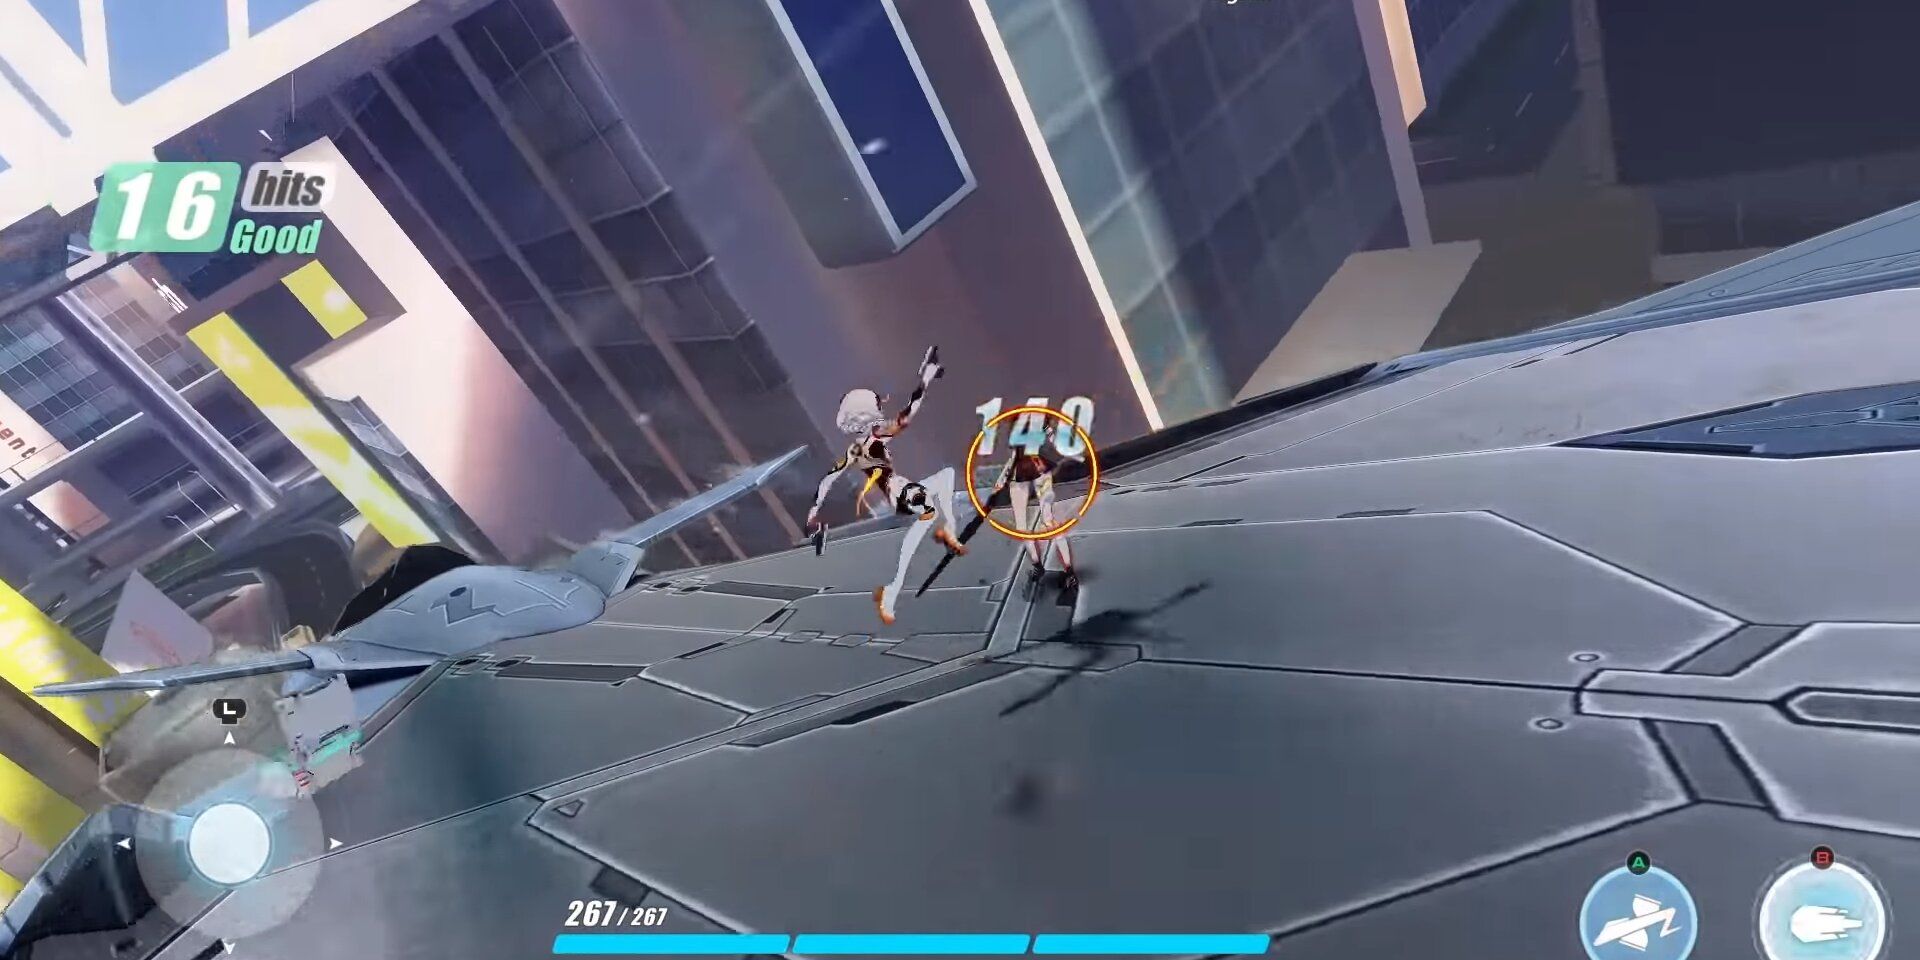 Image of a battle in the game Honkai Impact 3rd.